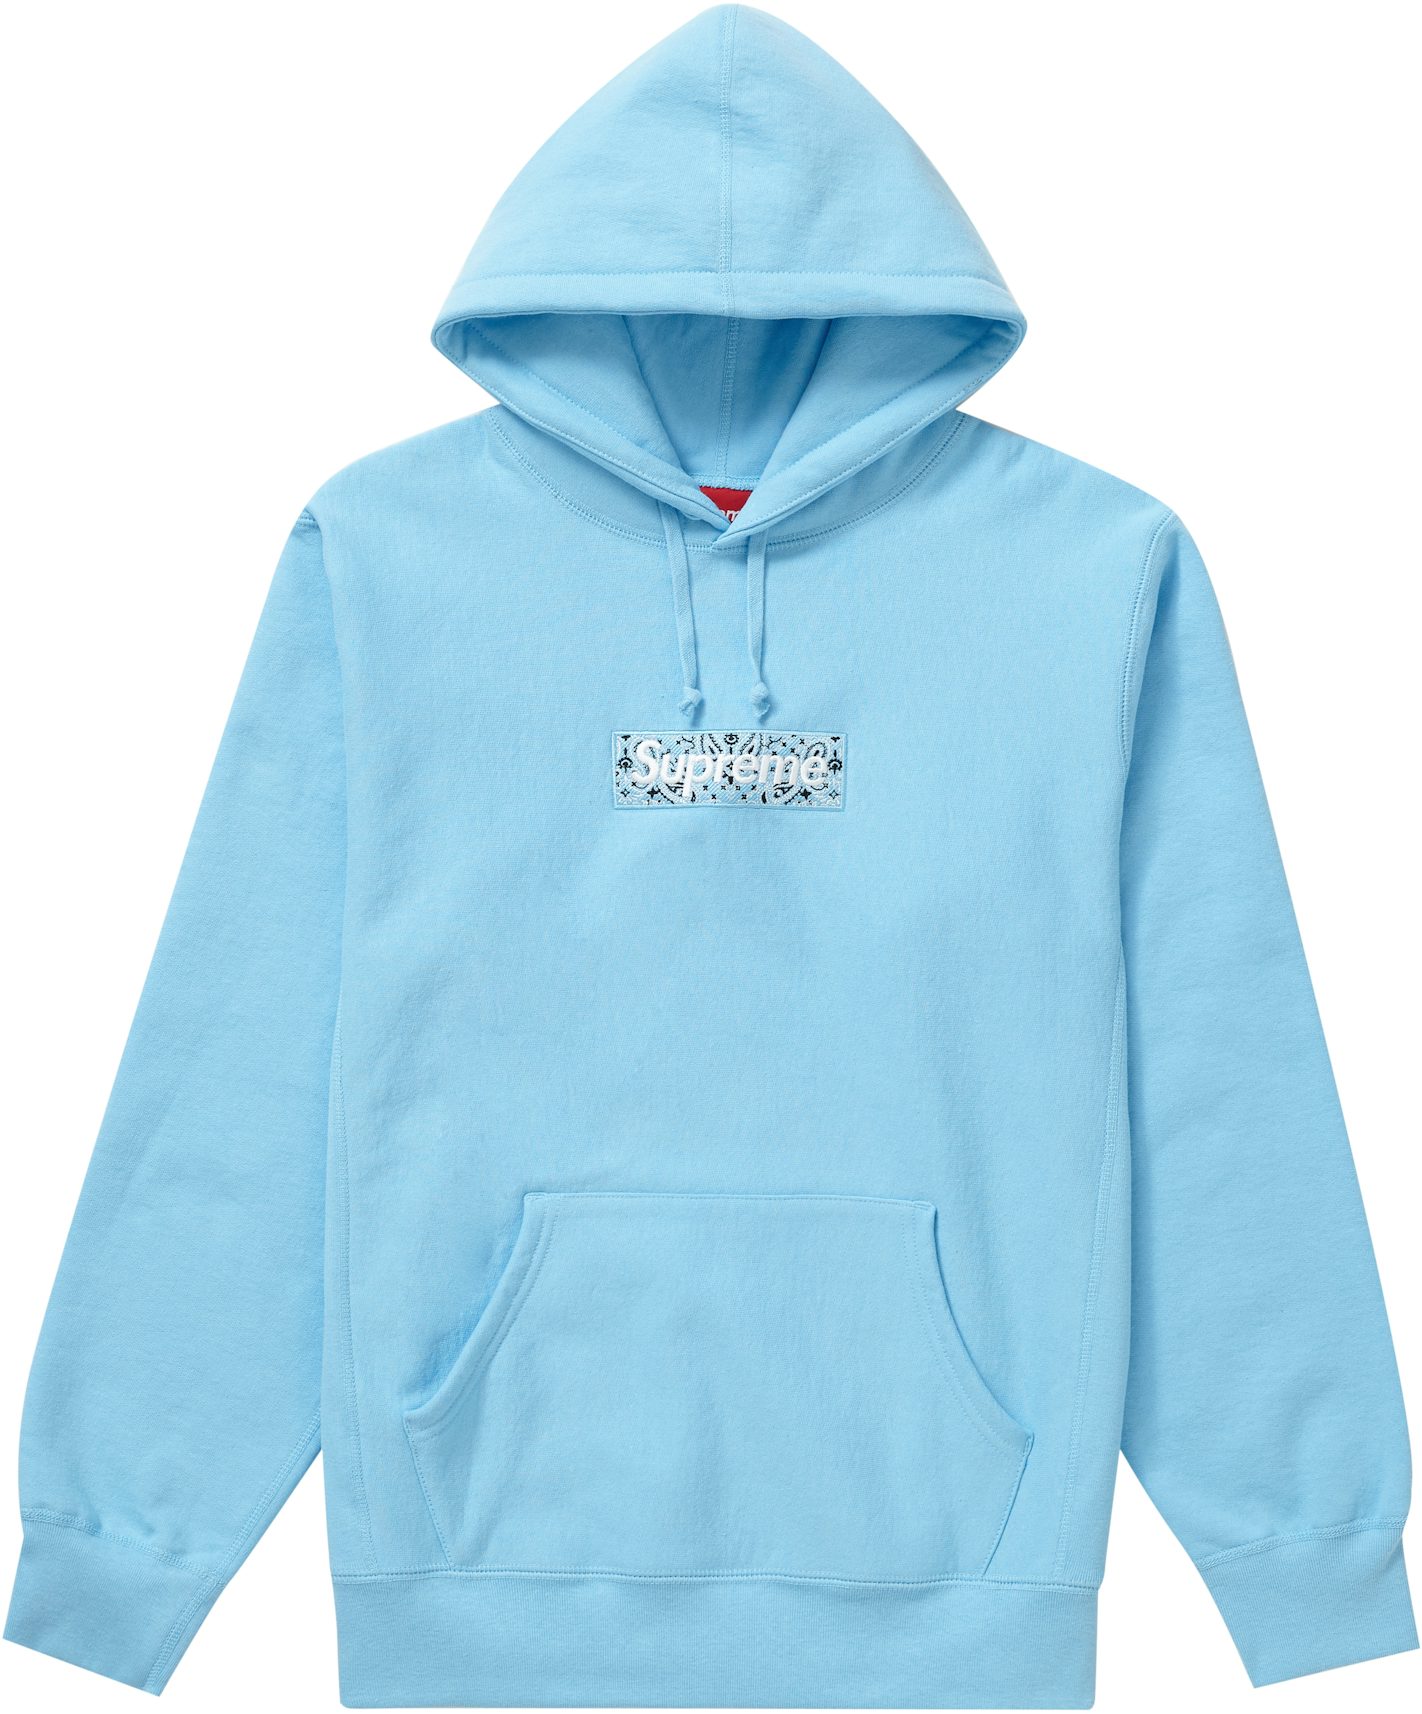 Fendi Zip Hoodie - Light Blue w. Logo » New Products Every Day